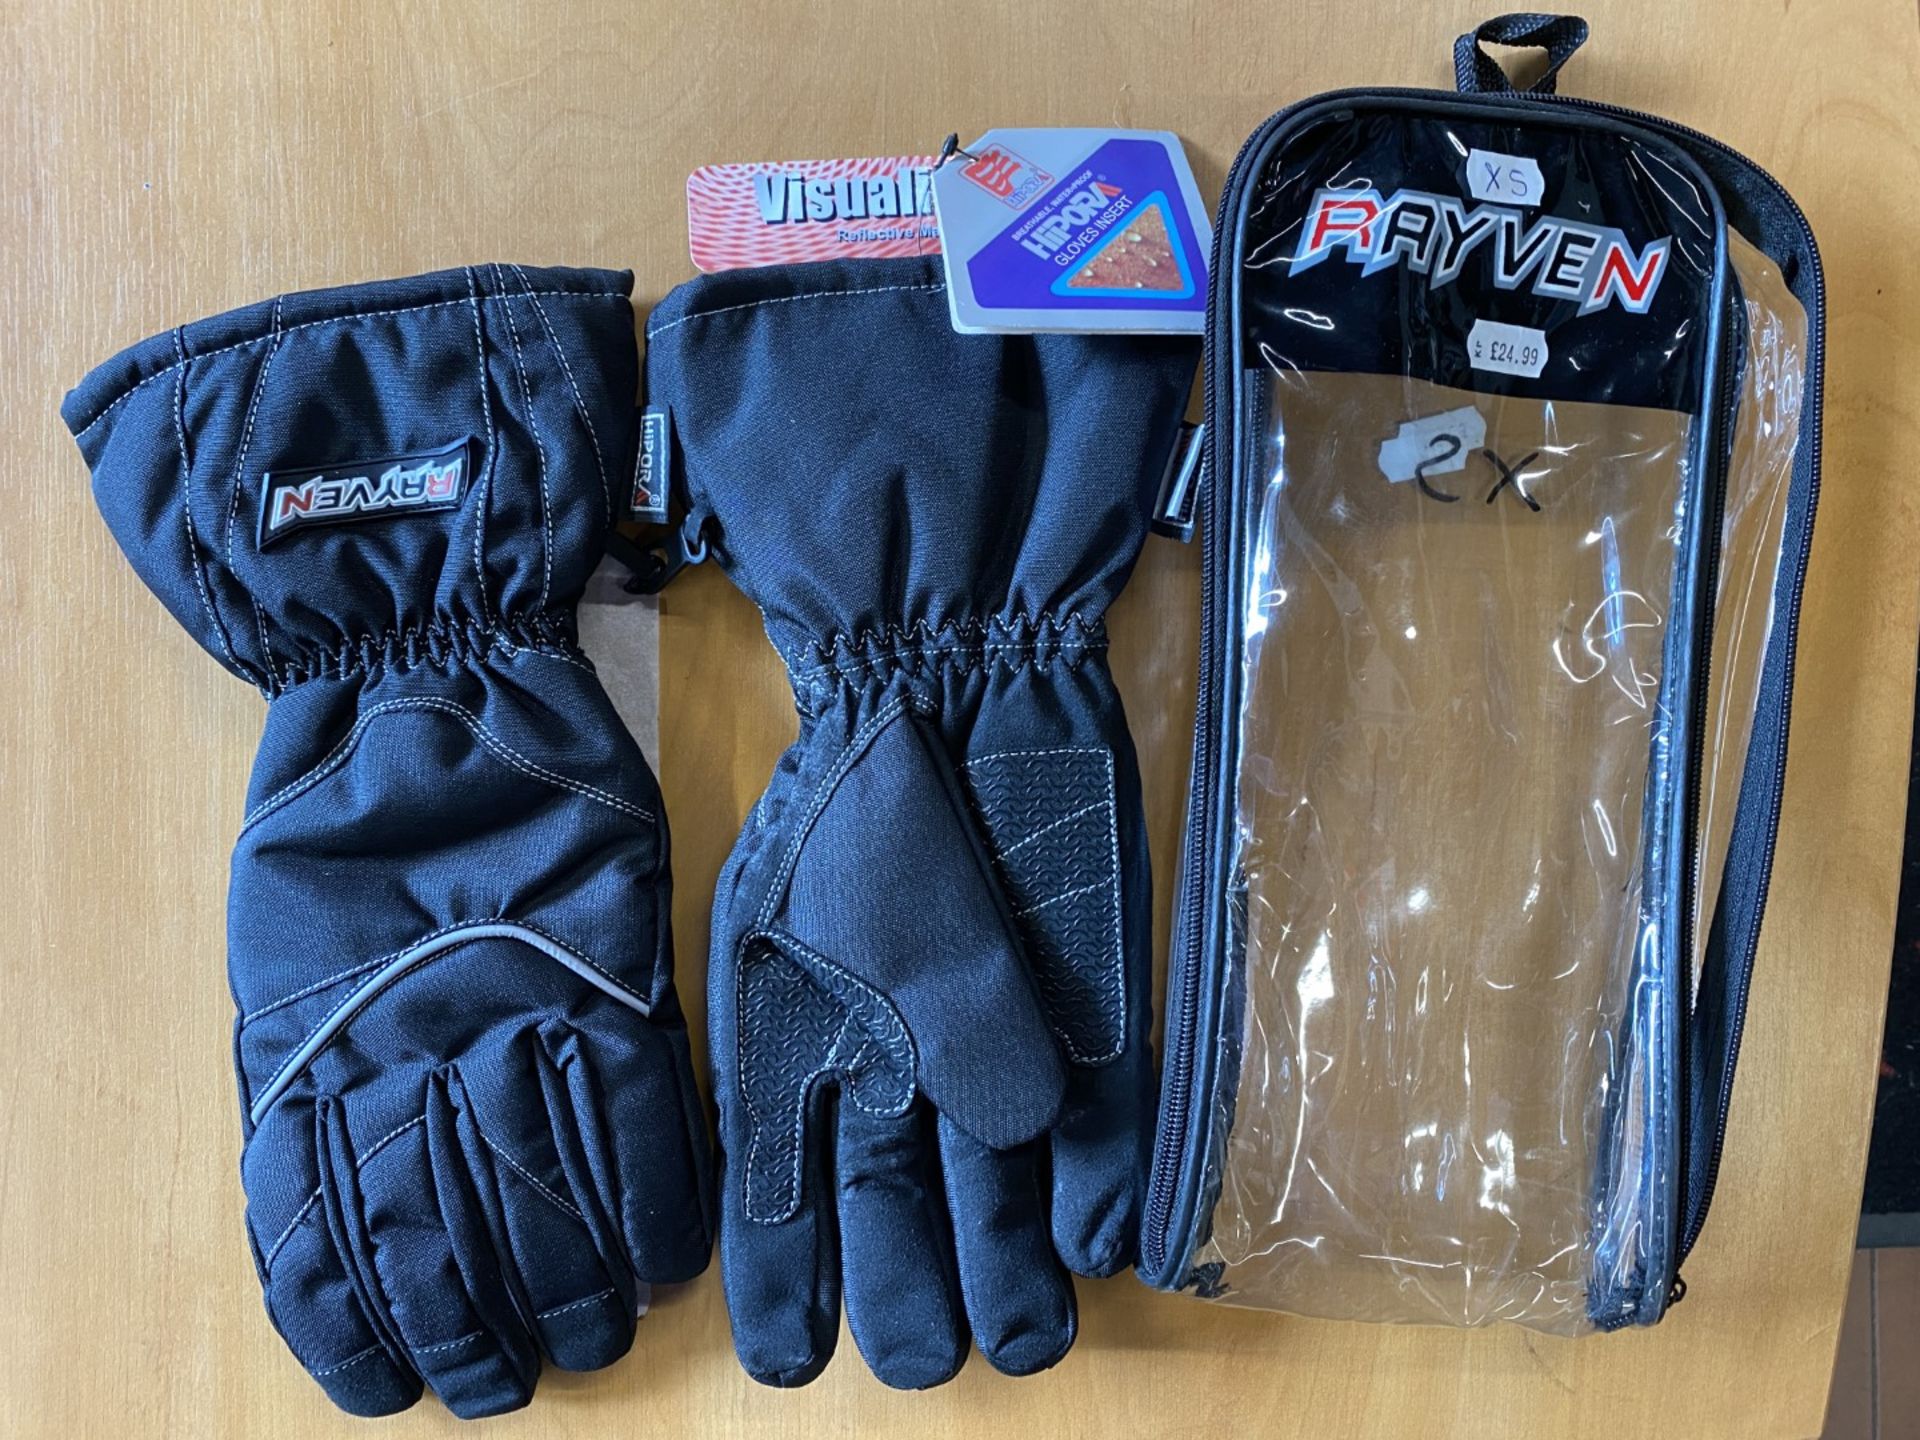 Rayven Gloves Black Fabric Small - Scotchlite 3M - Motorcycle / Motorbike Gloves - RRP £24.99